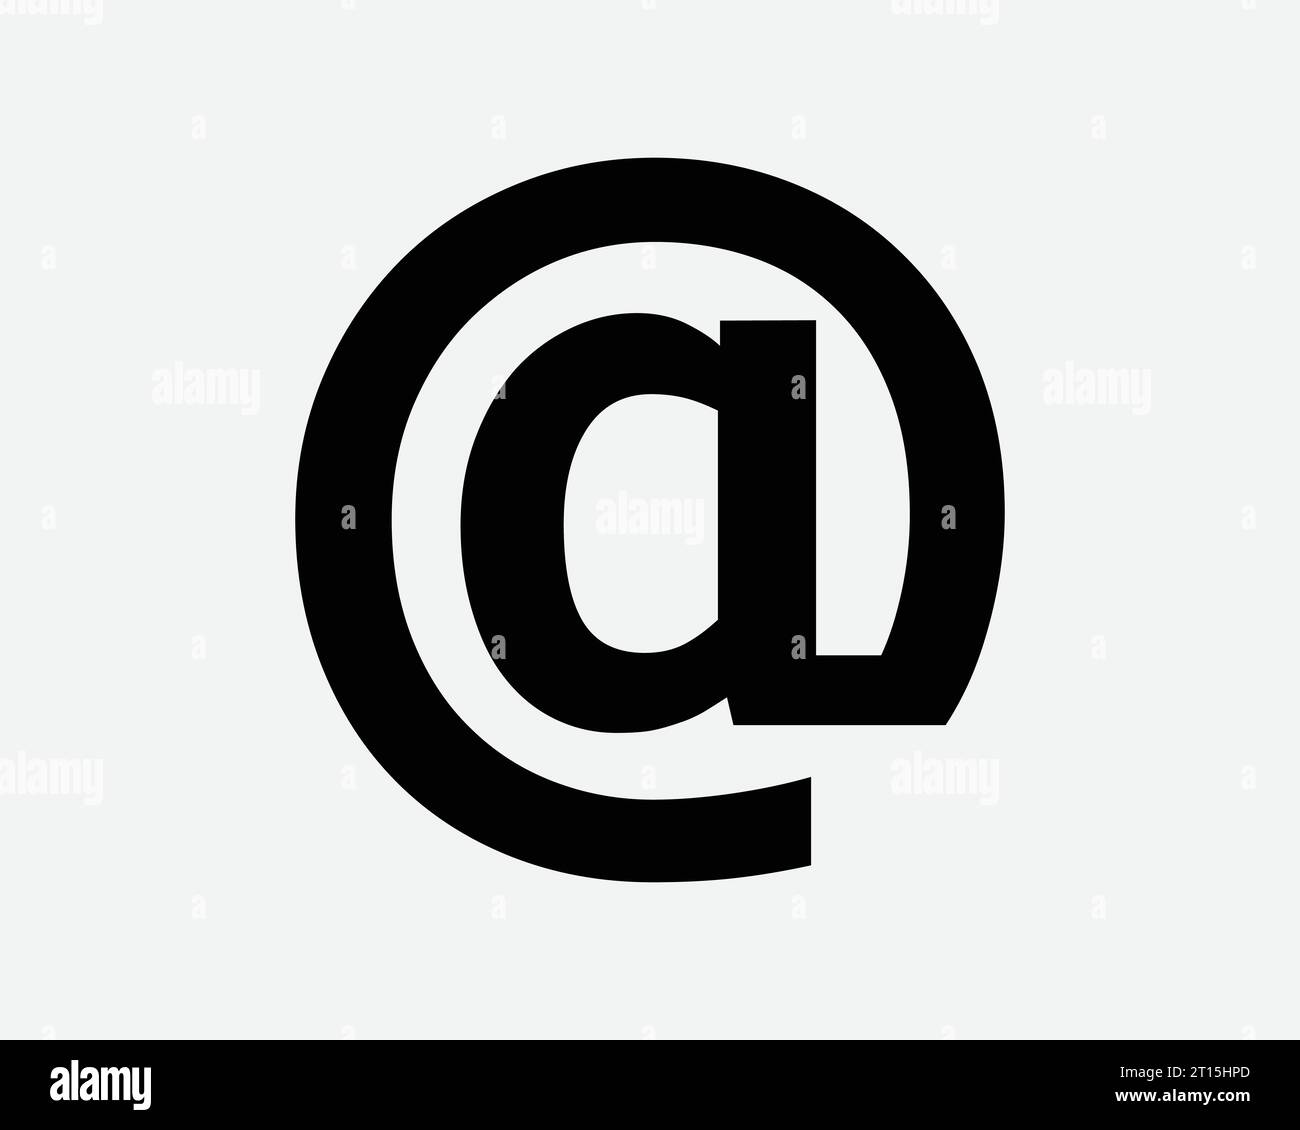 Alias Icon Email Contact Address Correspondence Communication Communicate Info Mail Connect Connection Black White Shape Line Sign Symbol EPS Vector Stock Vector